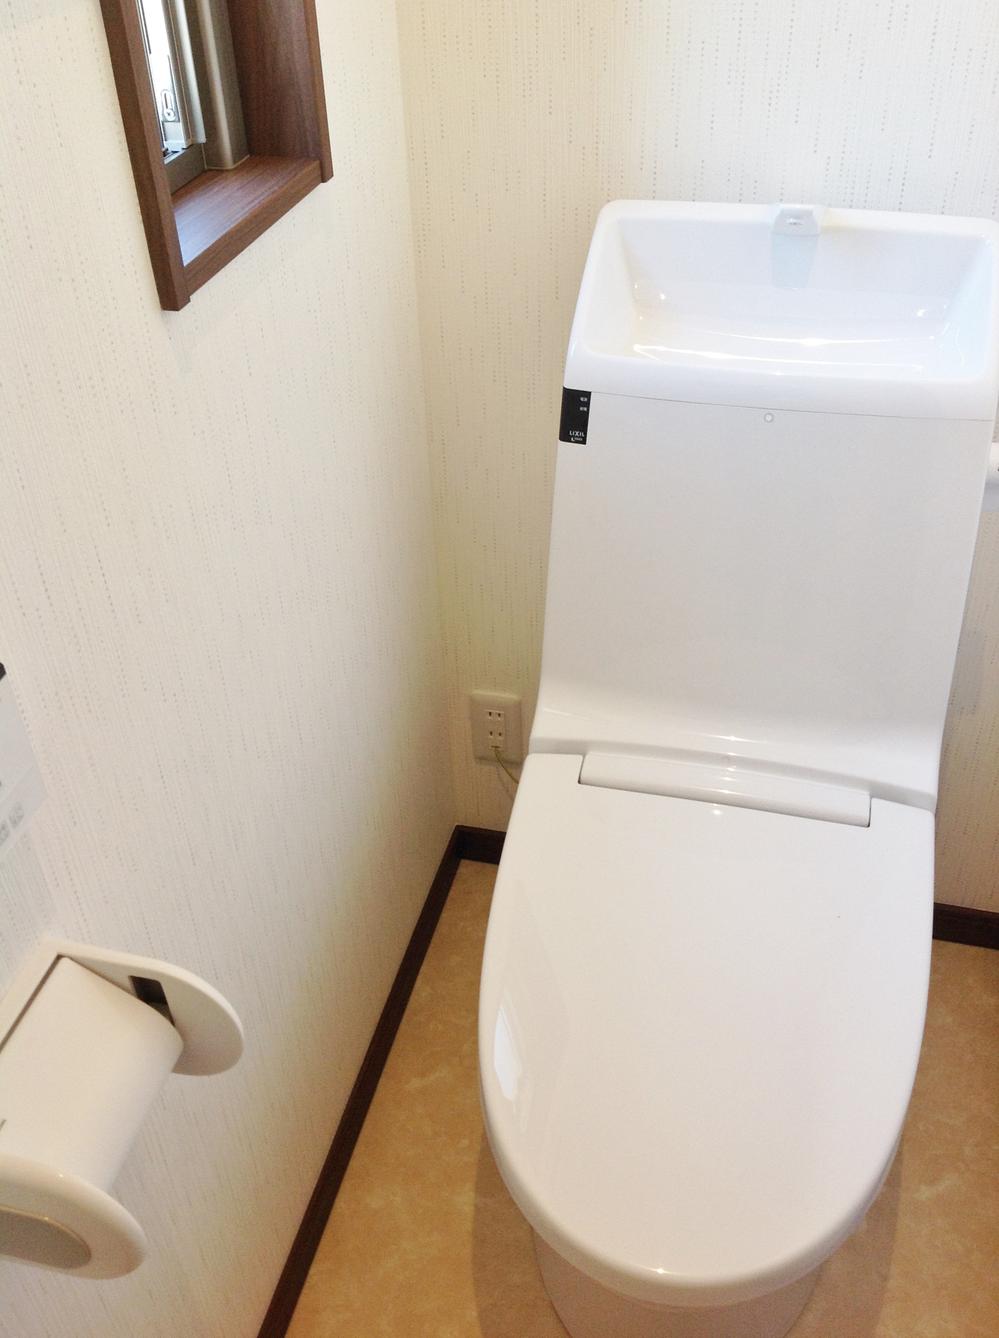 Other Equipment. Water-saving toilet of the latest model